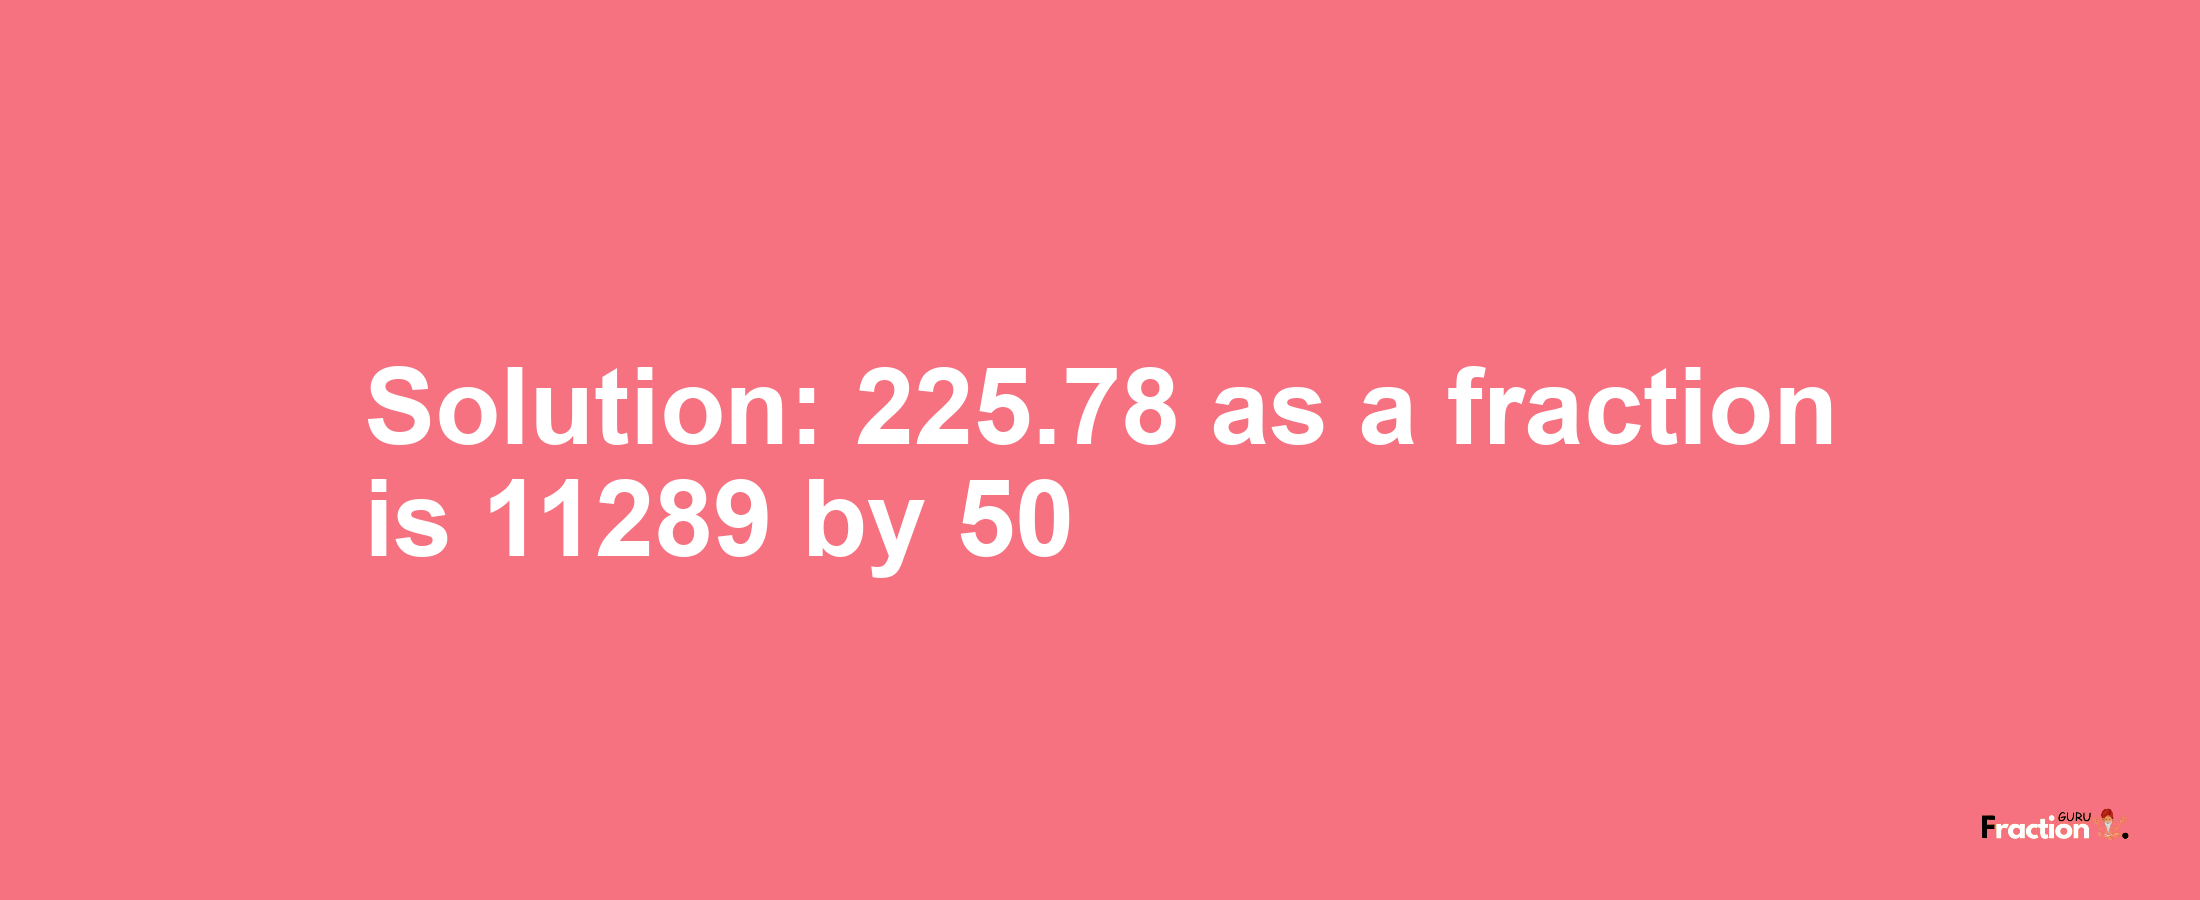 Solution:225.78 as a fraction is 11289/50